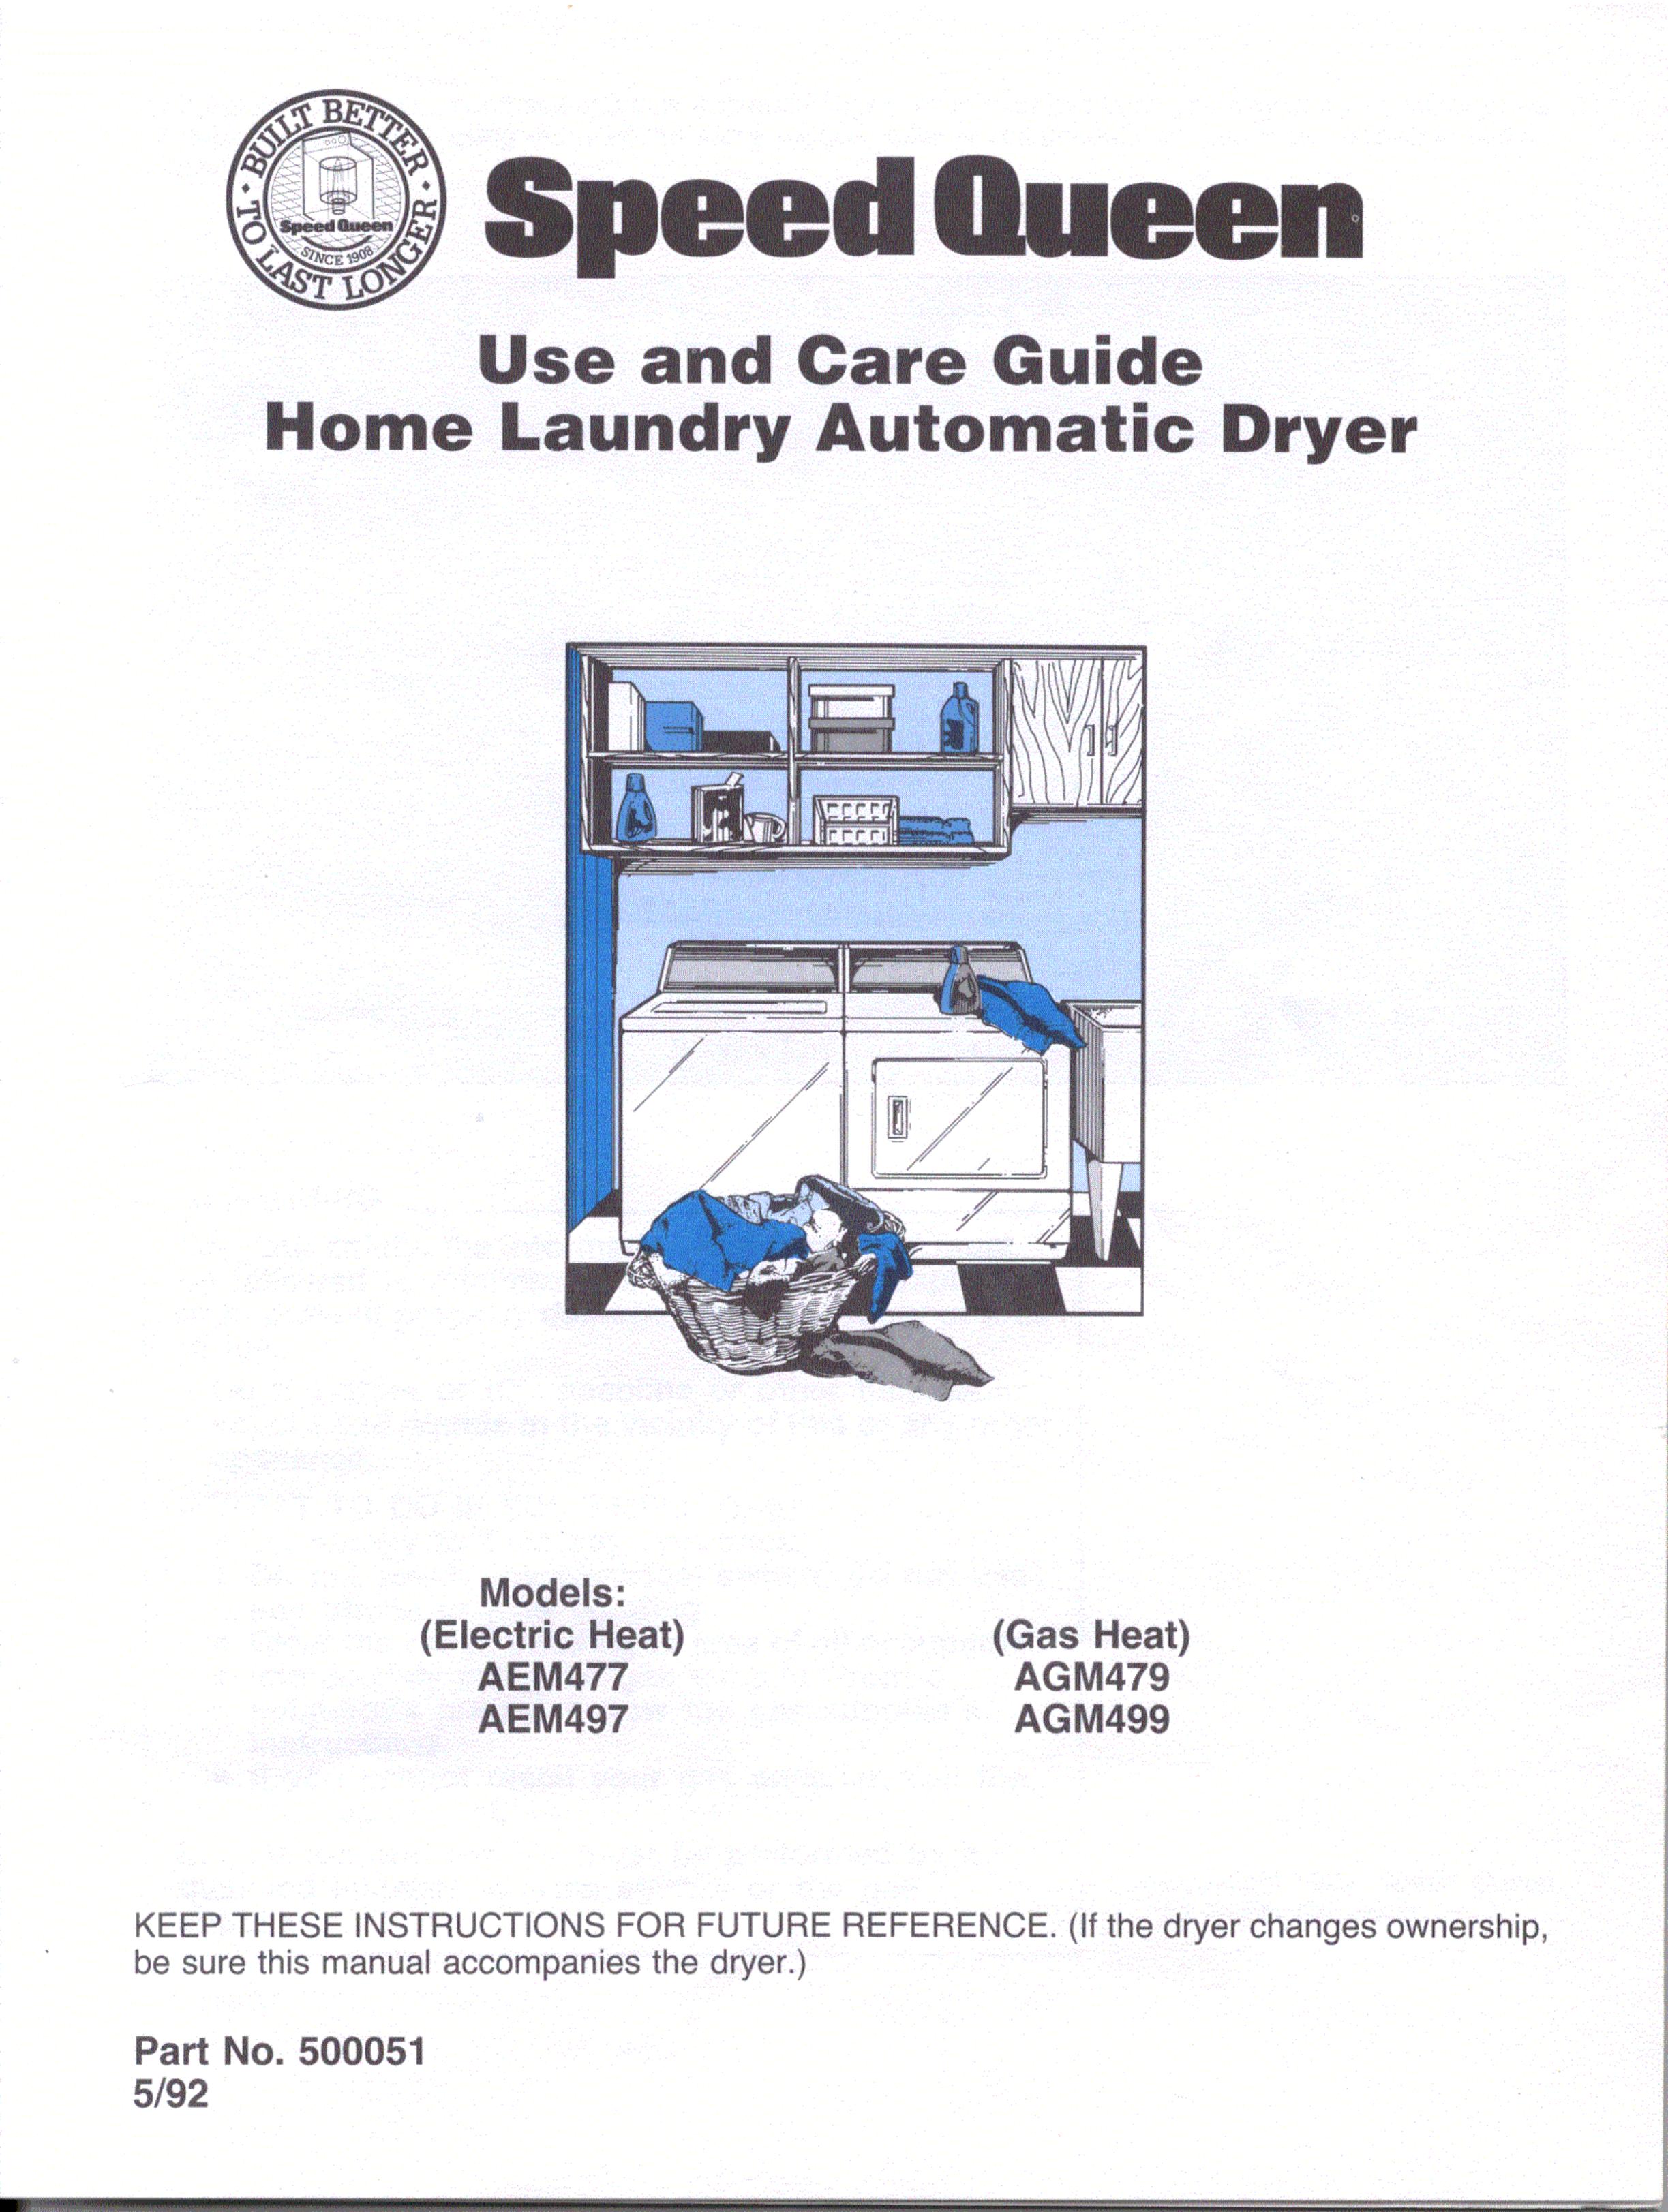 Speed Queen AGM499 Clothes Dryer User Manual